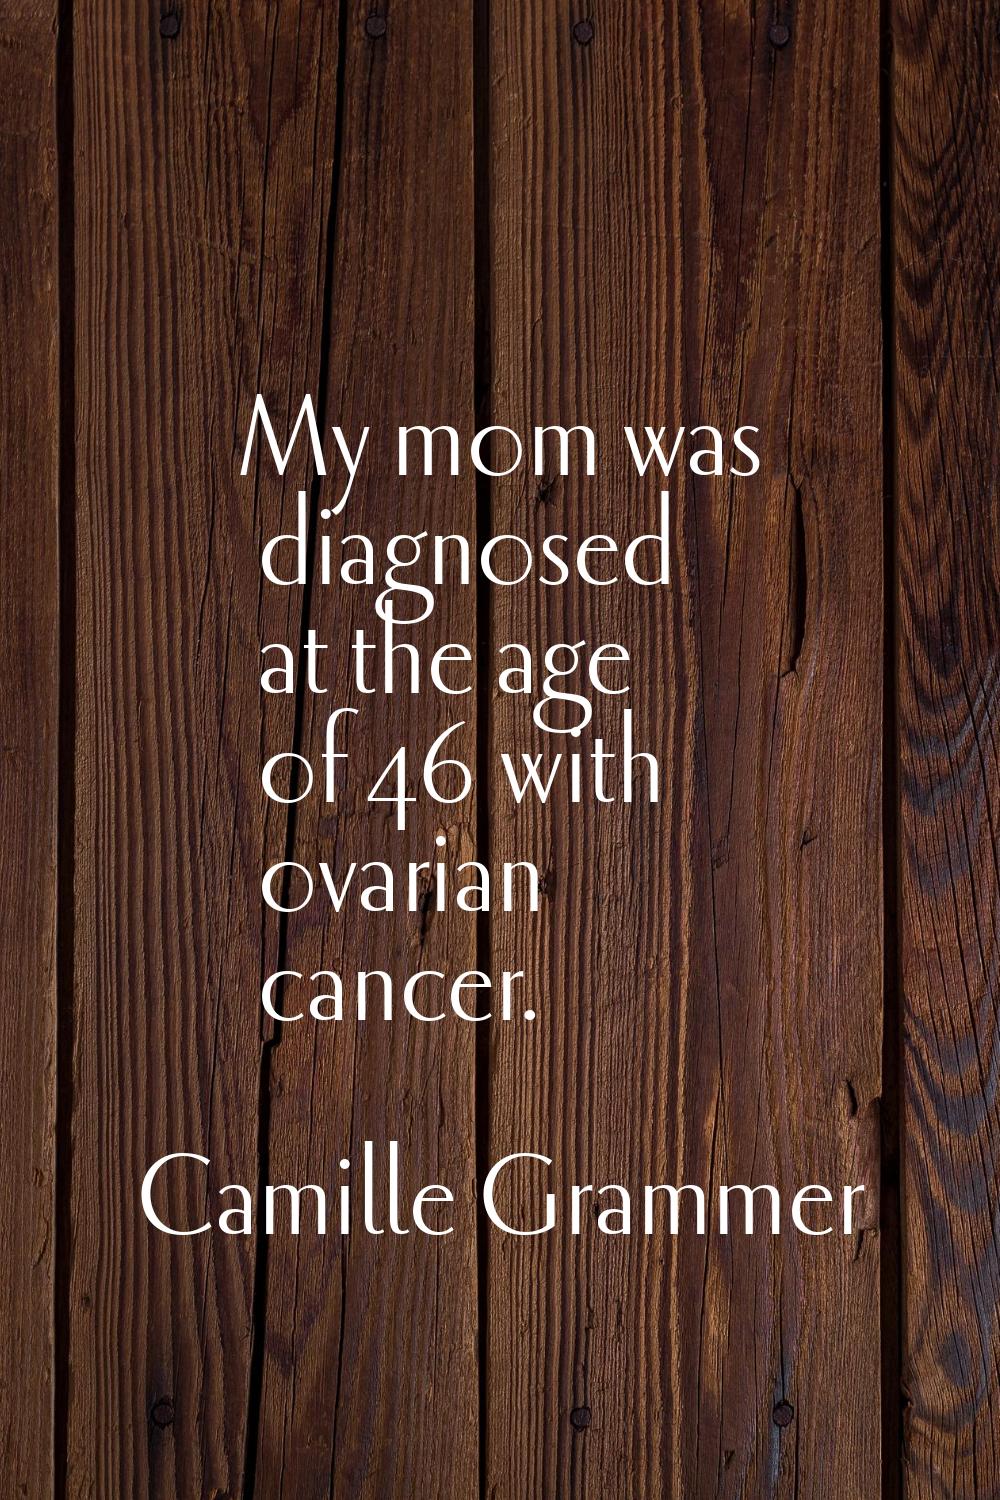 My mom was diagnosed at the age of 46 with ovarian cancer.